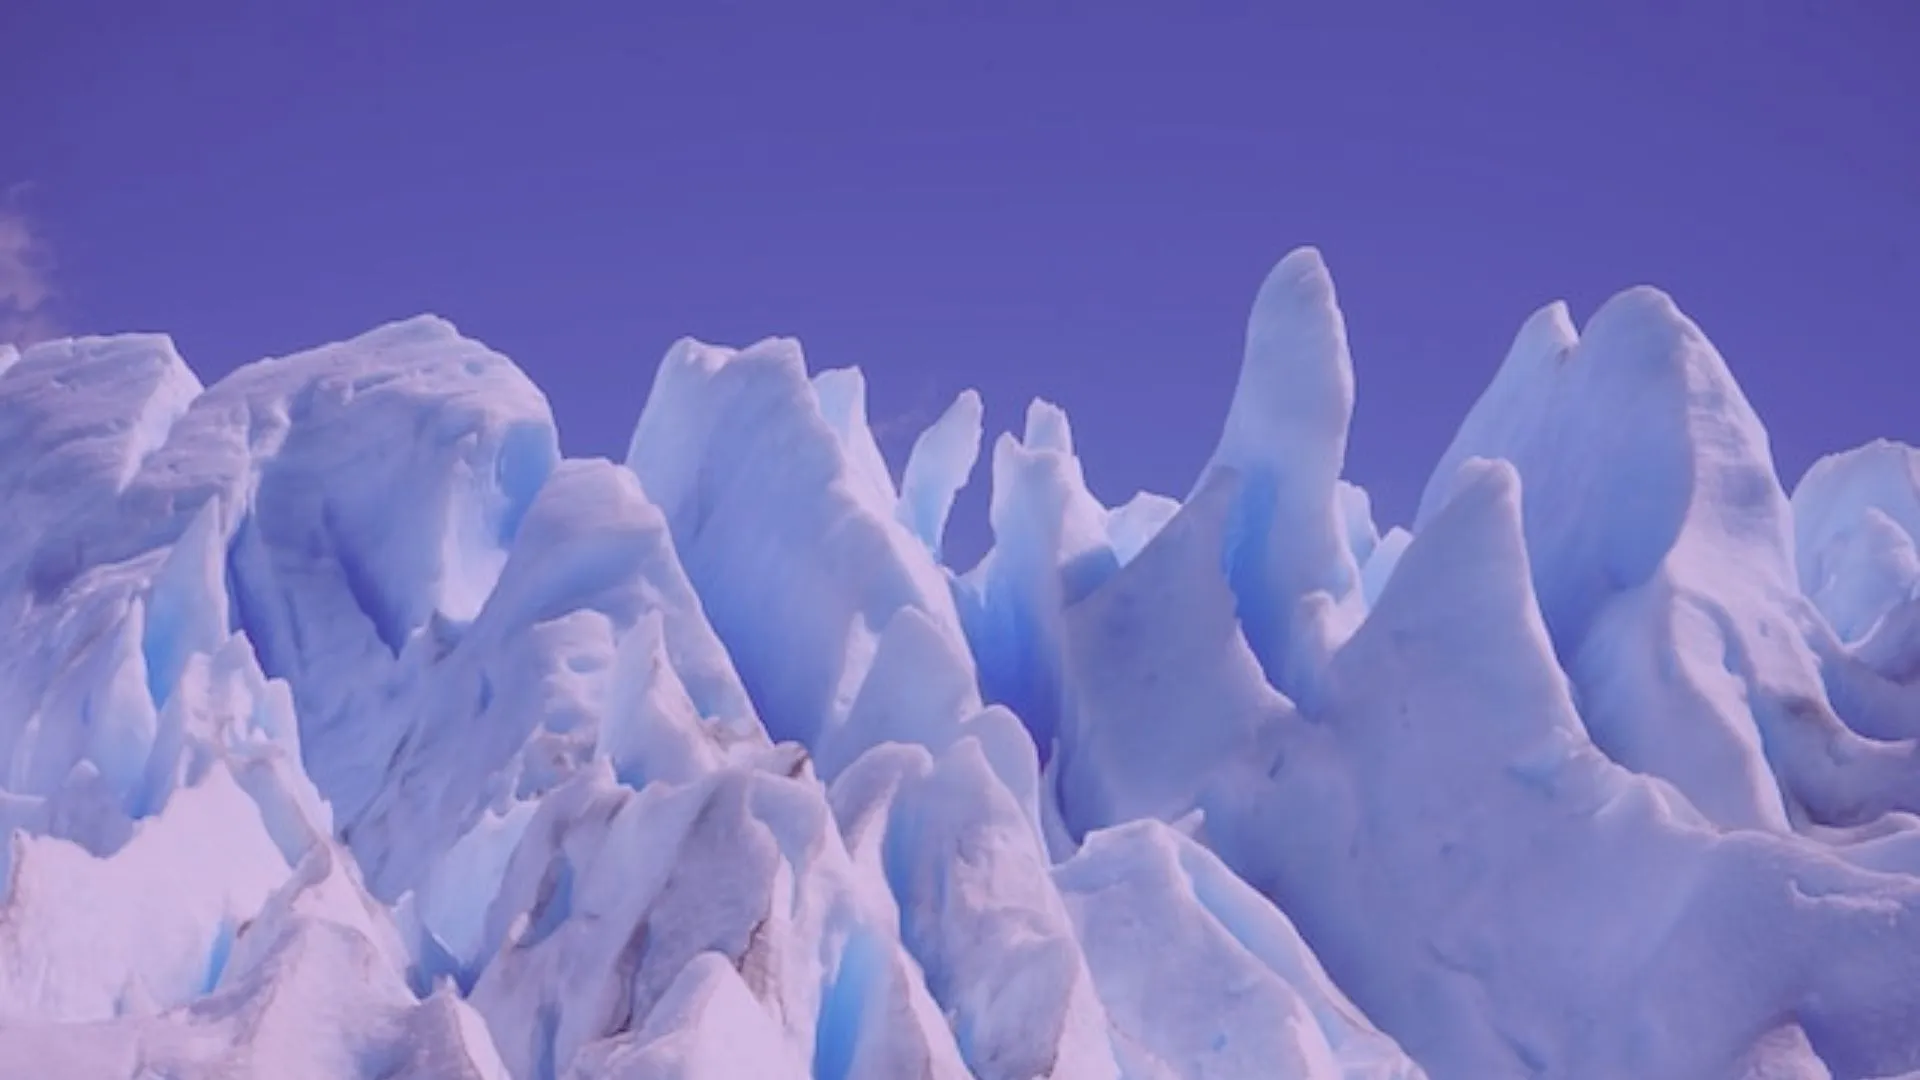 An ice mountain representing the ICE scoring model by Sean Ellis